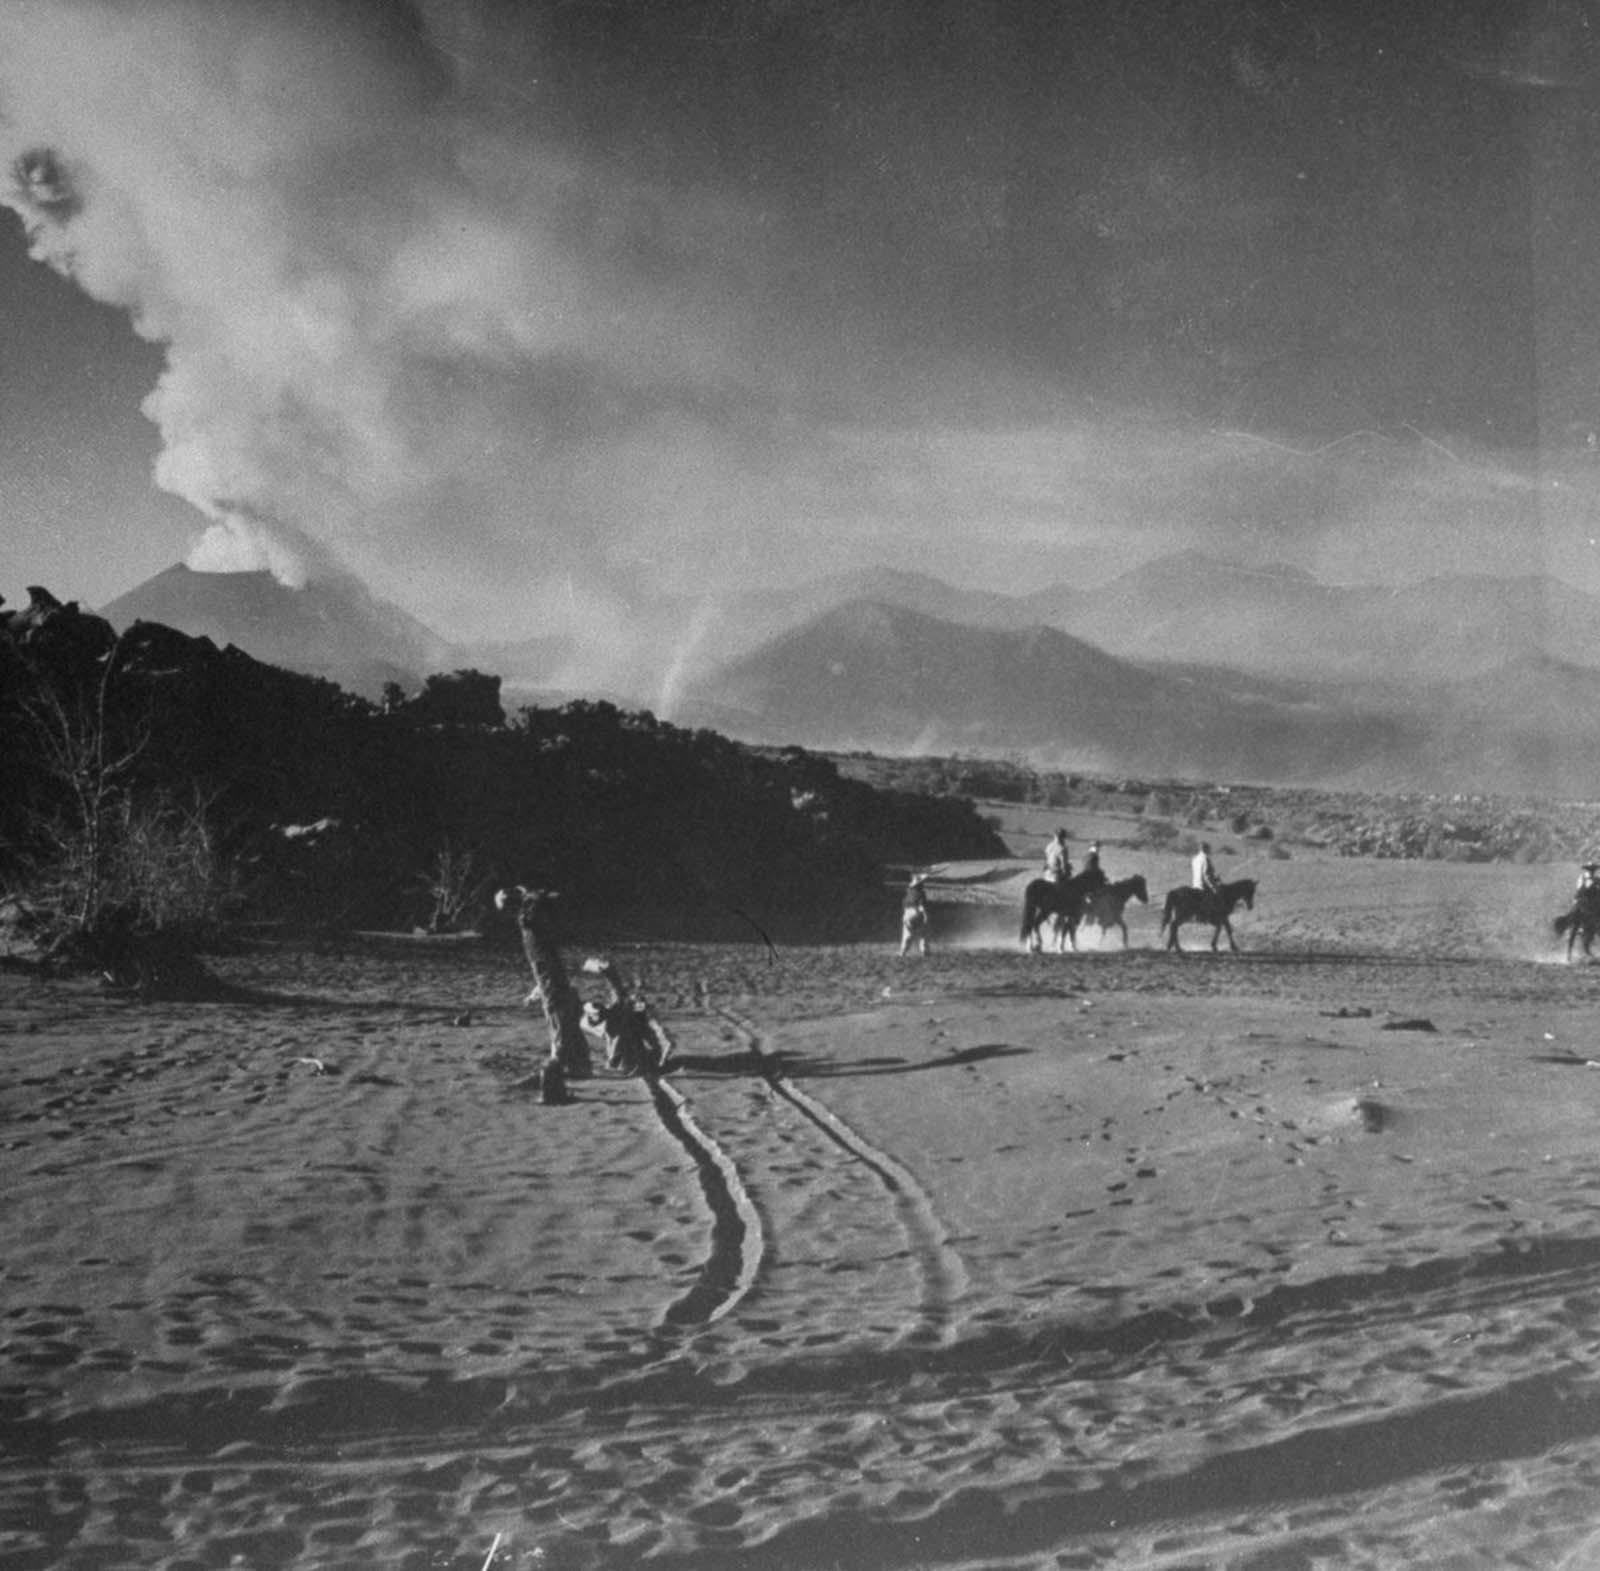 Rare Photos Documenting the Eruption of Parícutin volcano in 1943